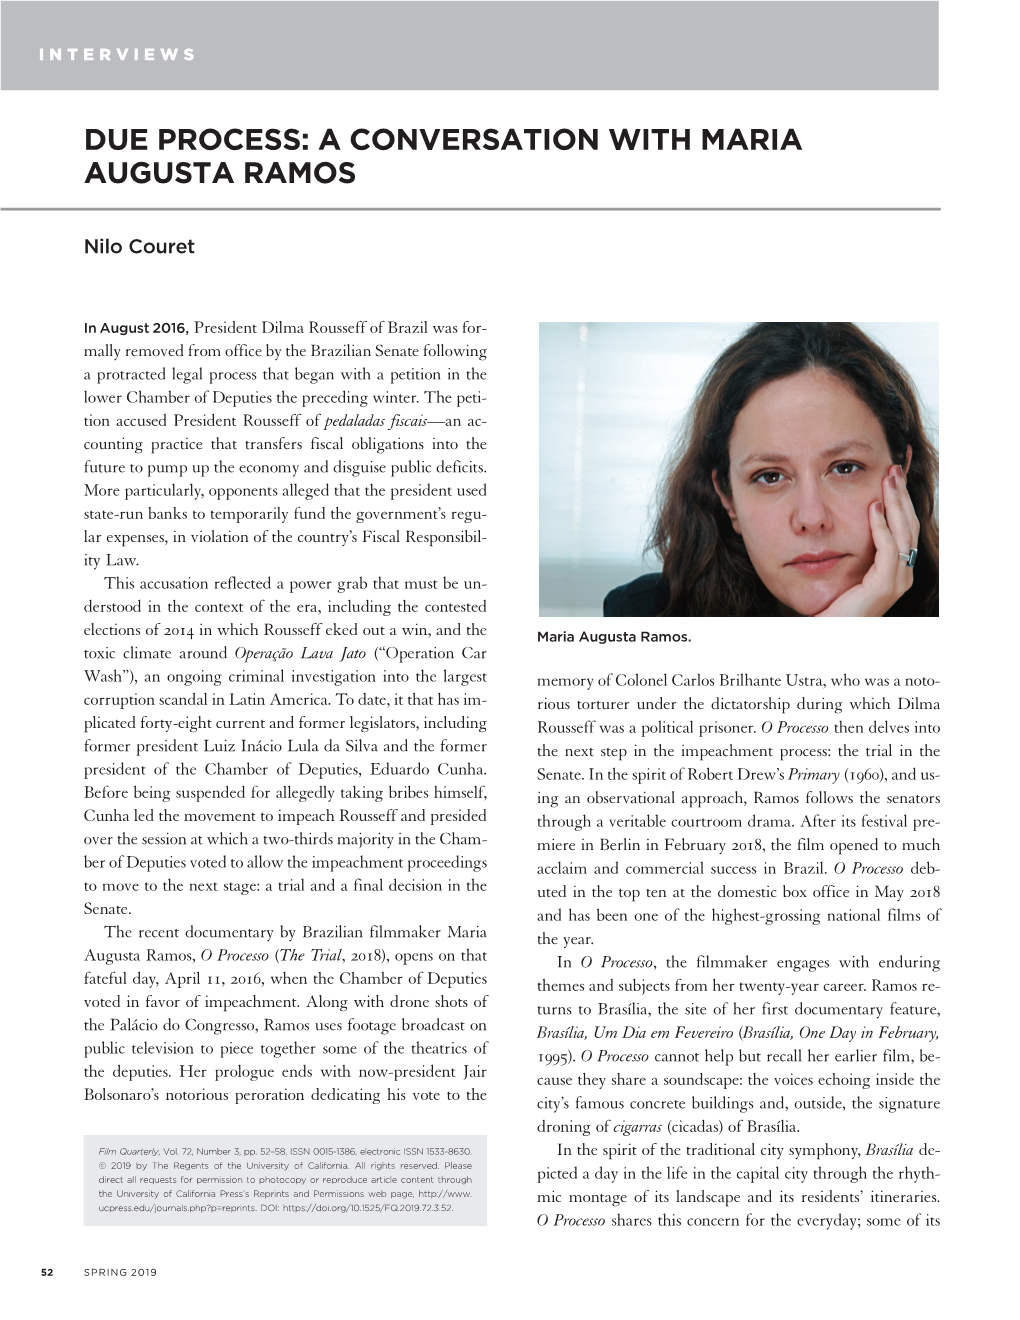 Due Process: a Conversation with Maria Augusta Ramos